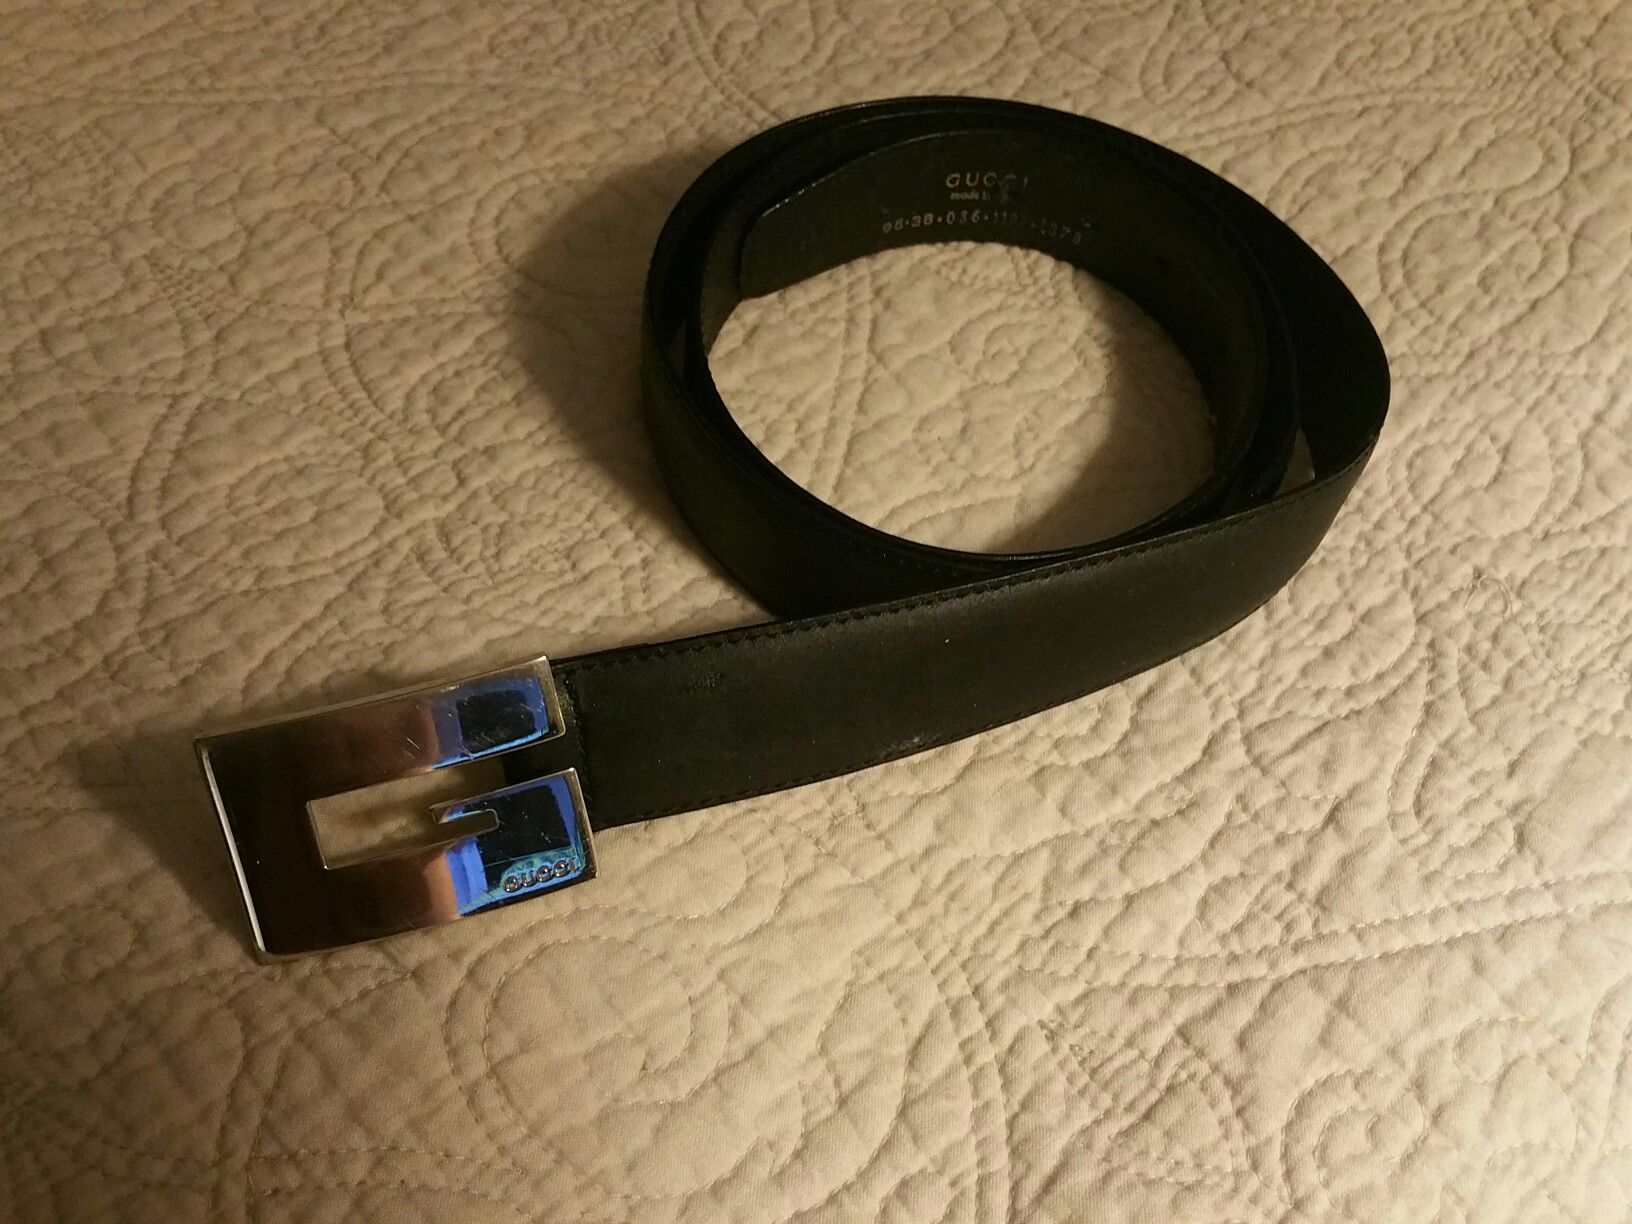 Authentic Gucci belt with silver Gucci buckle